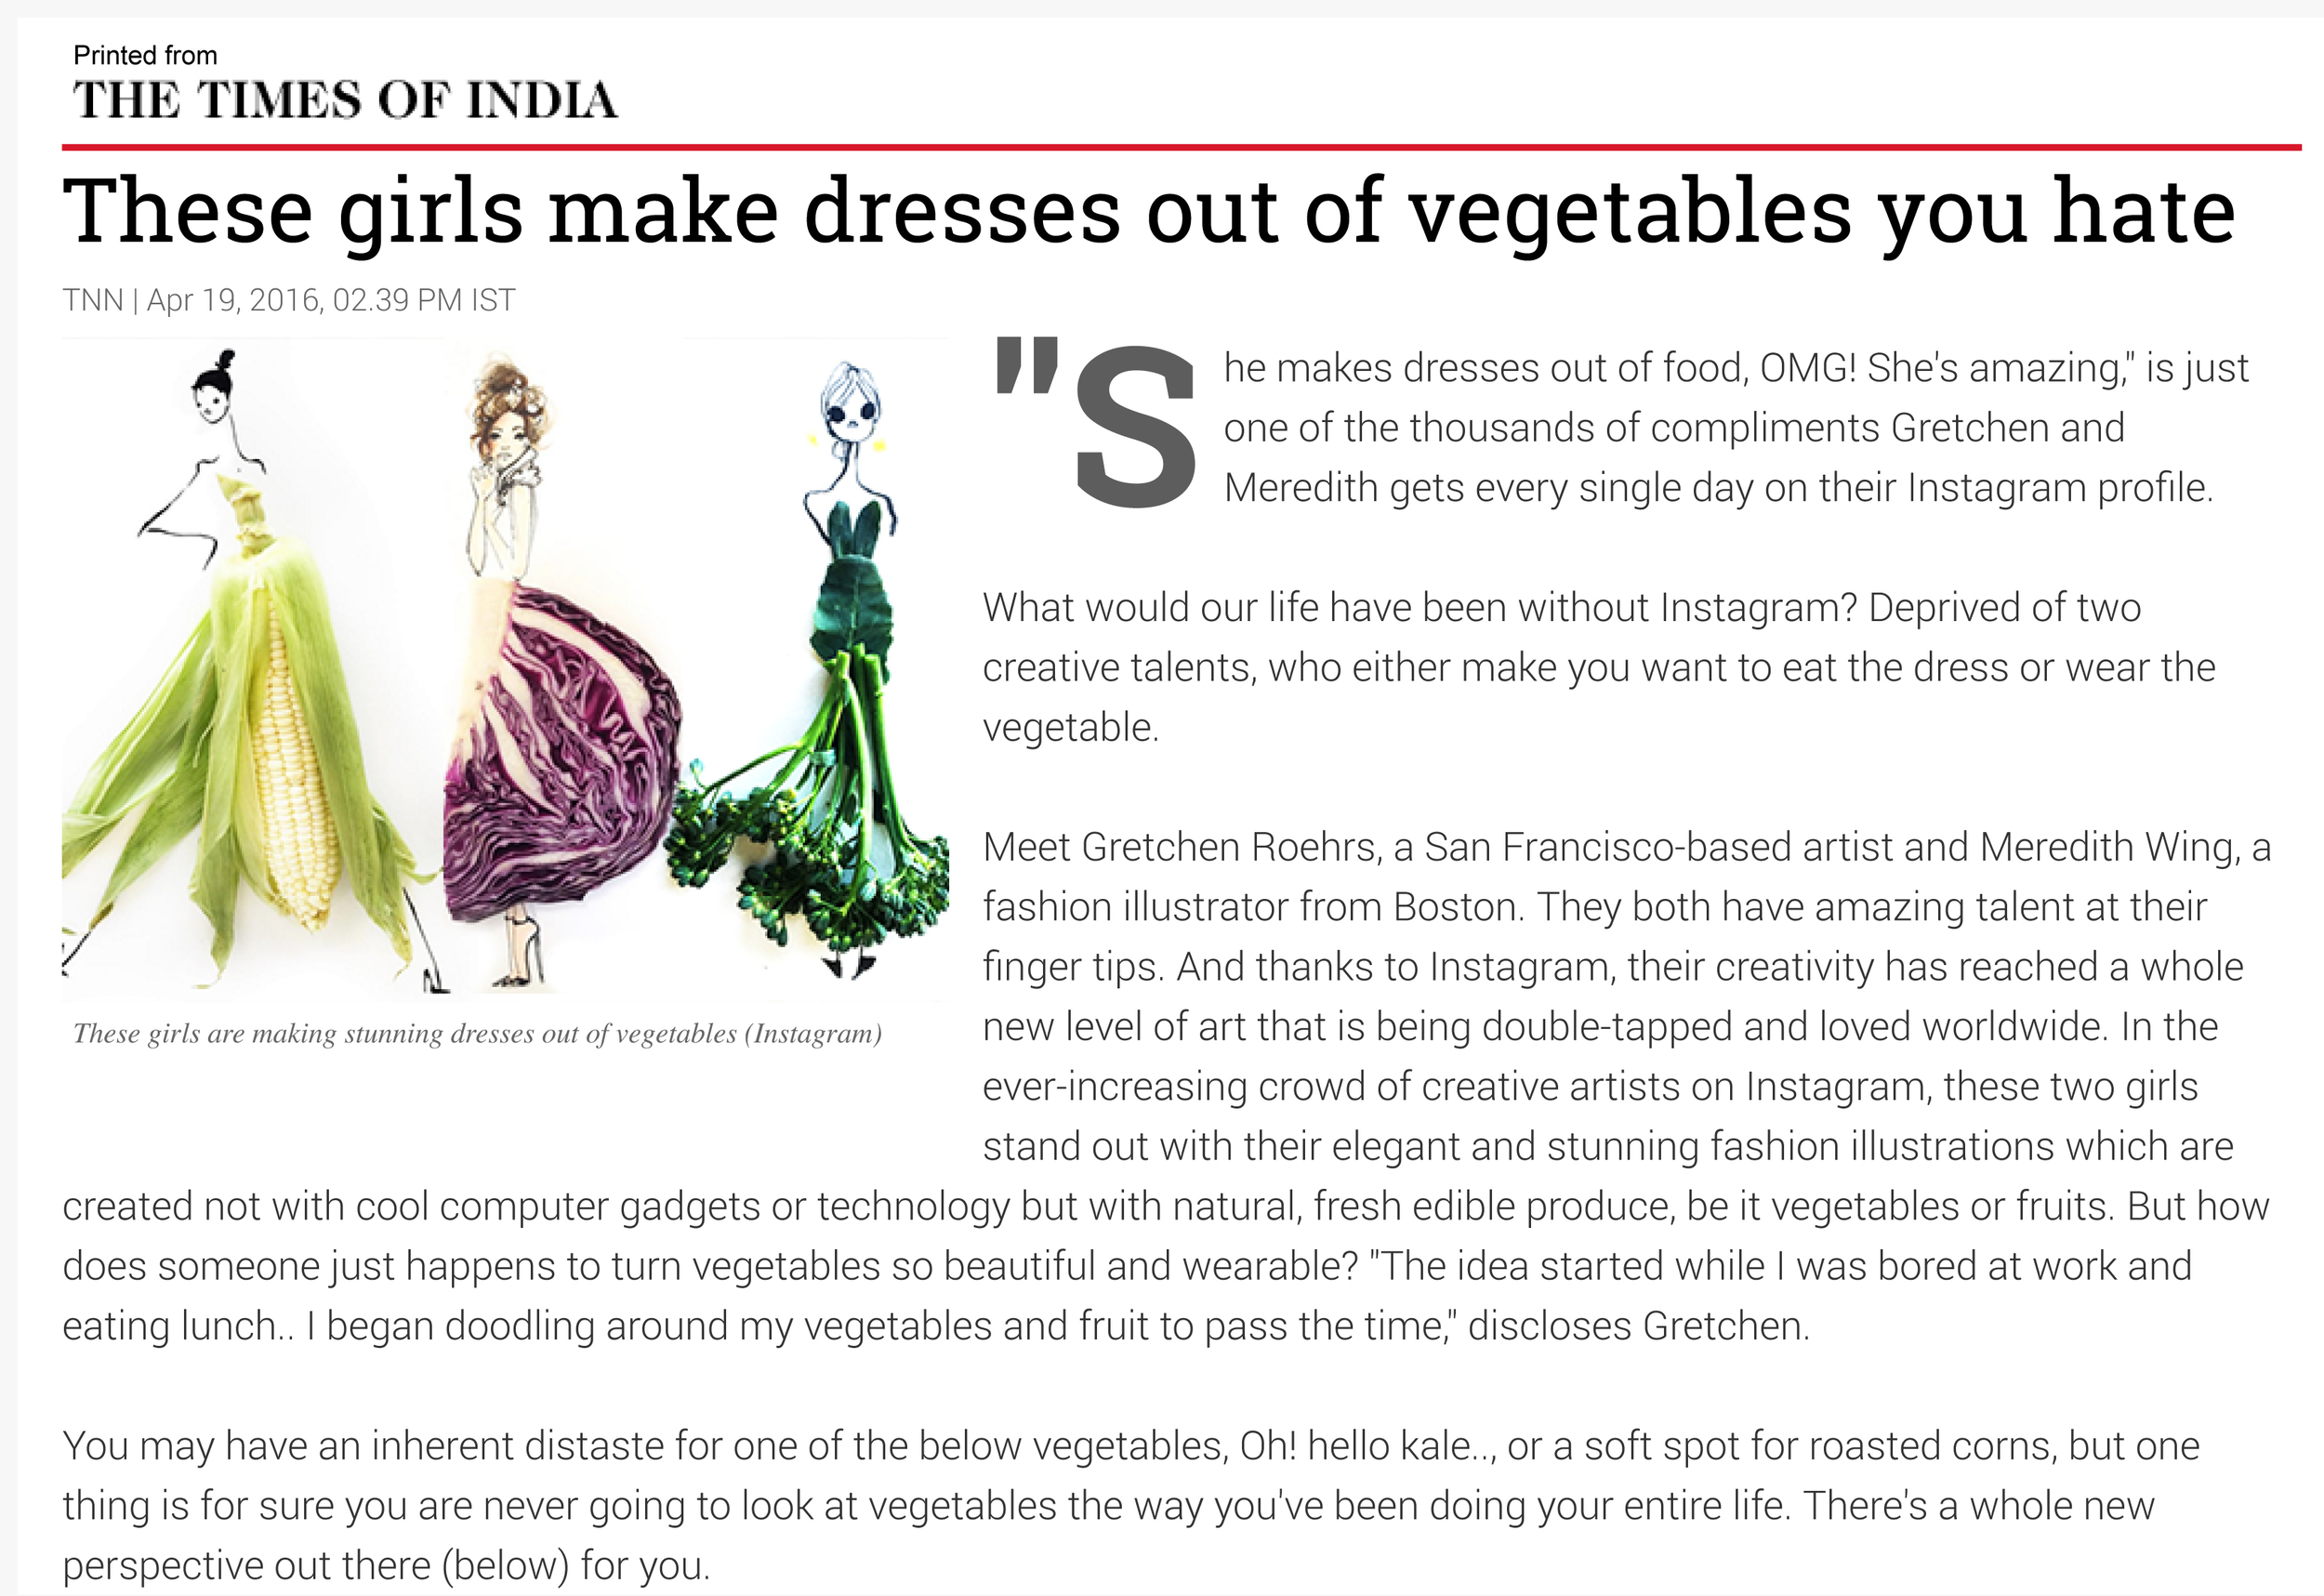 These girls make dresses out of vegetables you hate - Times of India-1.jpg